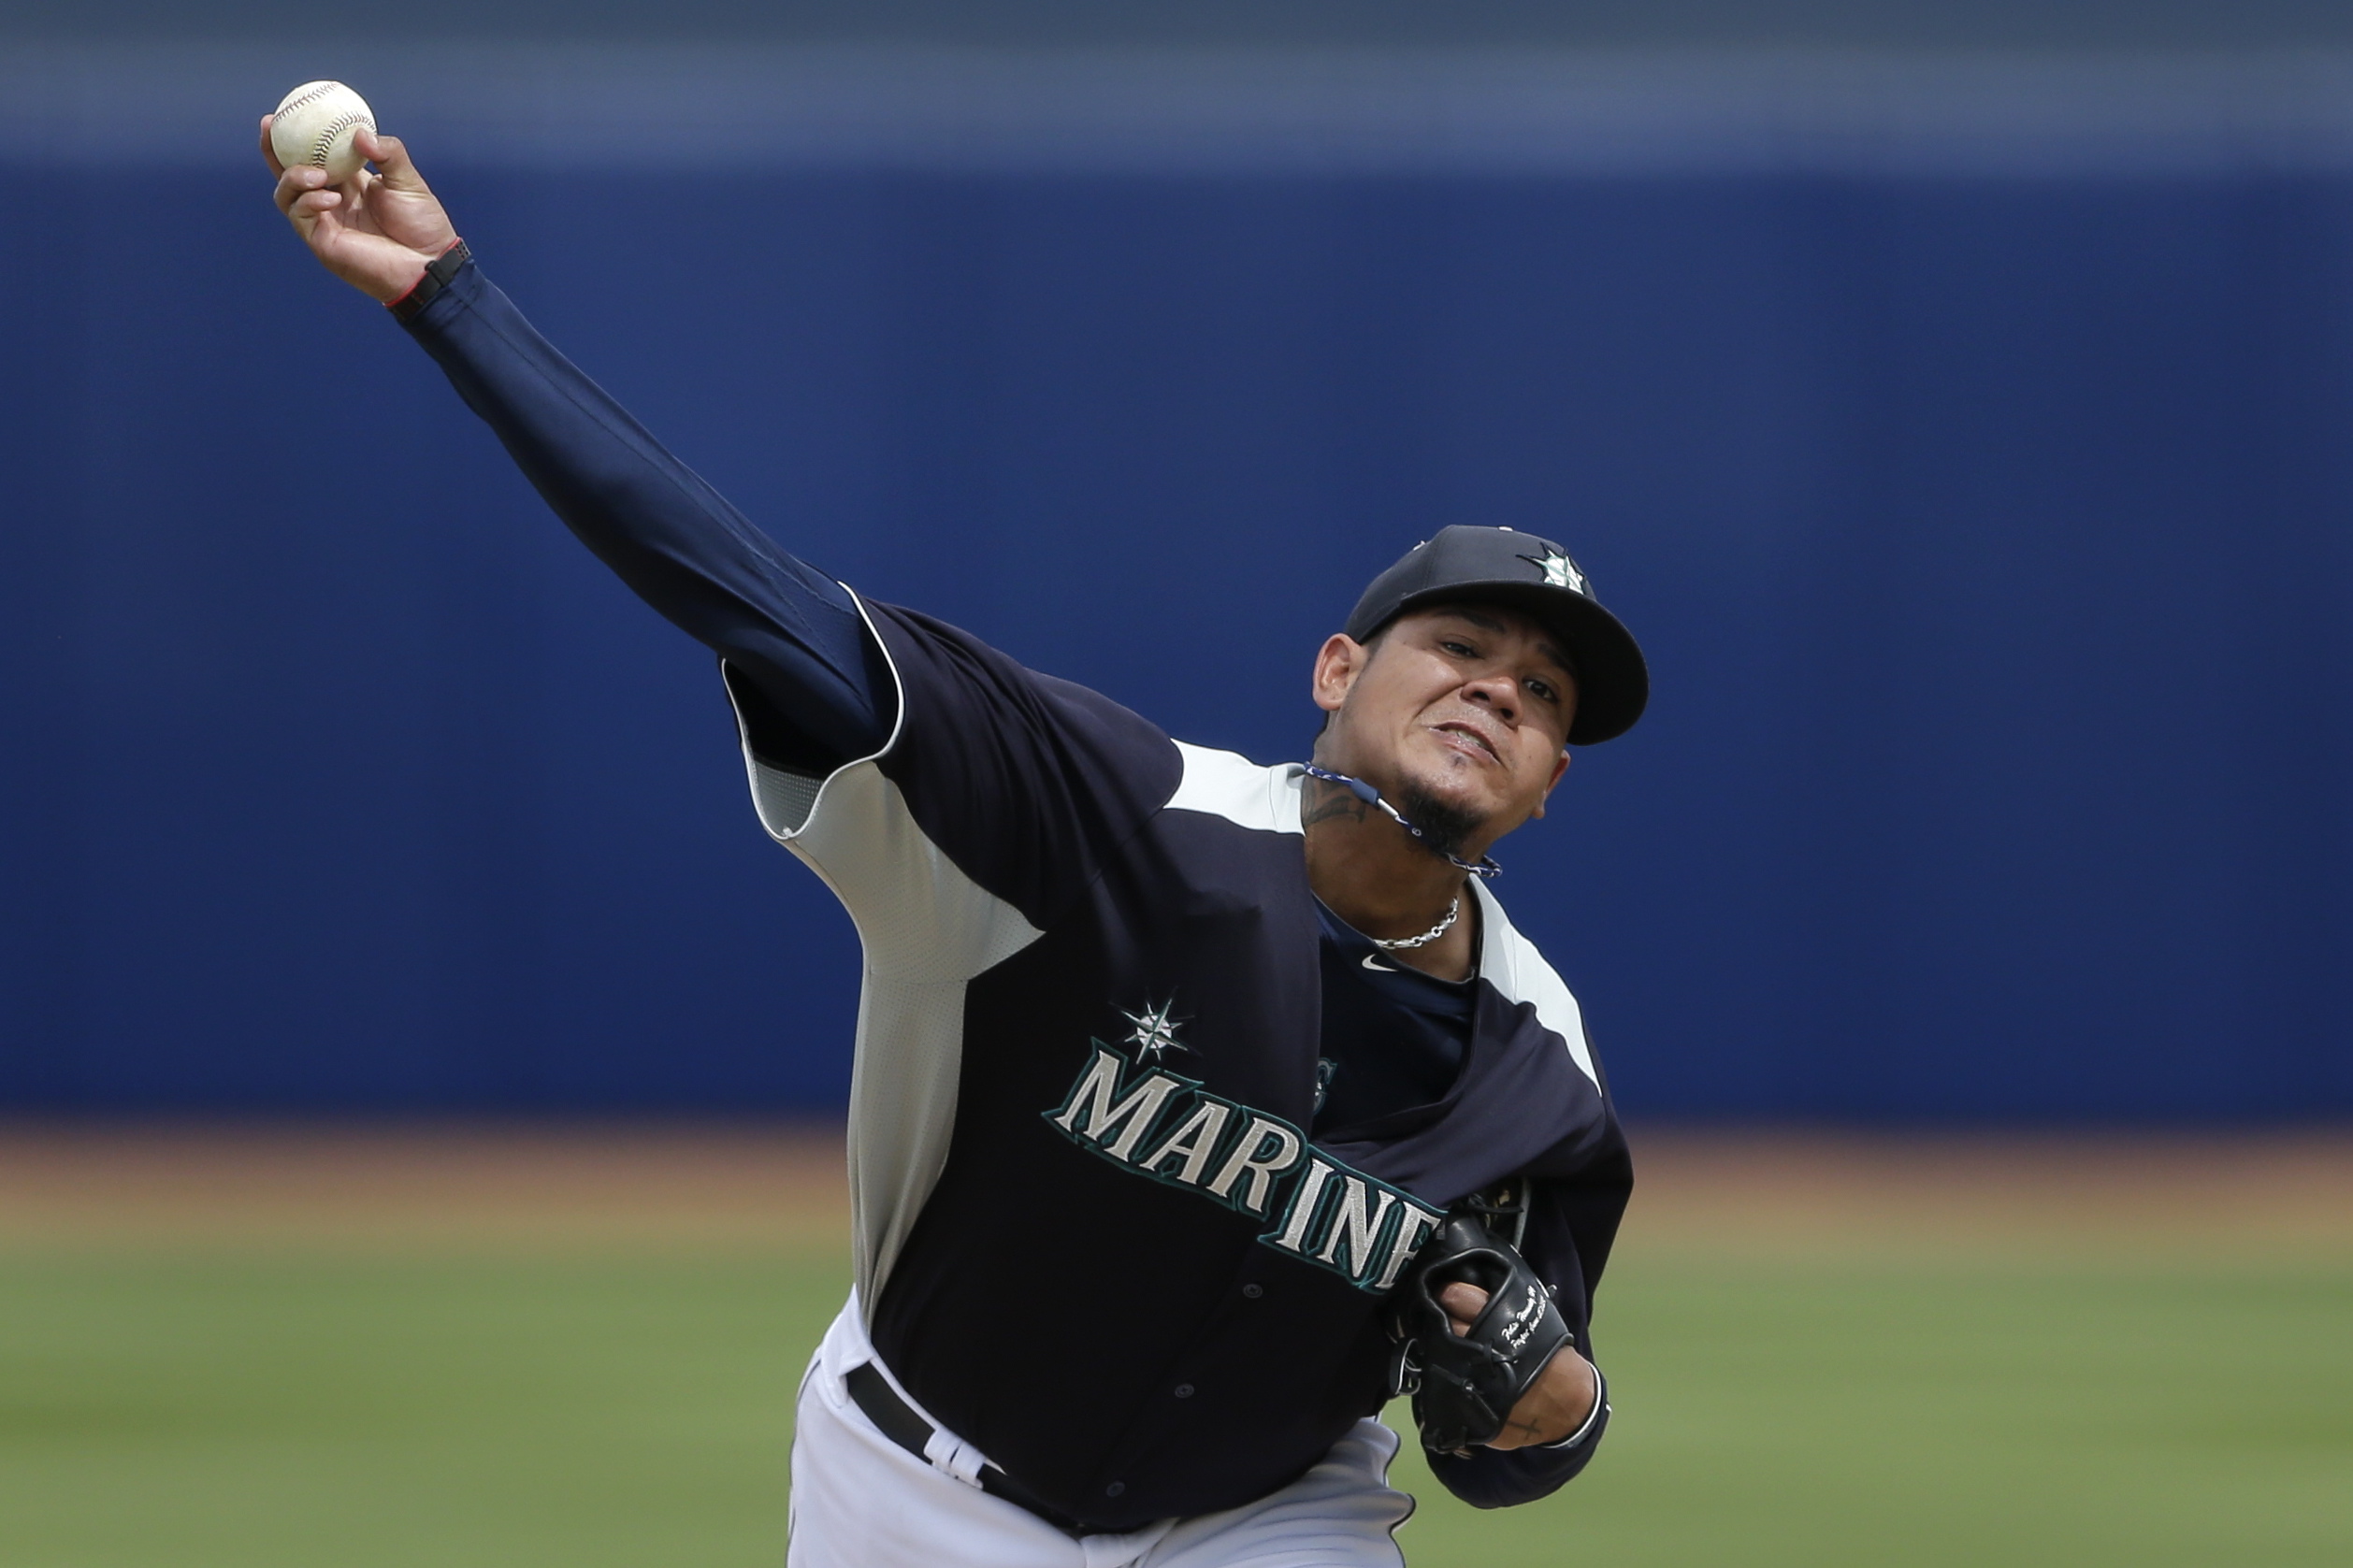 Seattle Mariners starting pitcher Felix Hernandez has a big contract and even bigger expectations for the 2013 season.